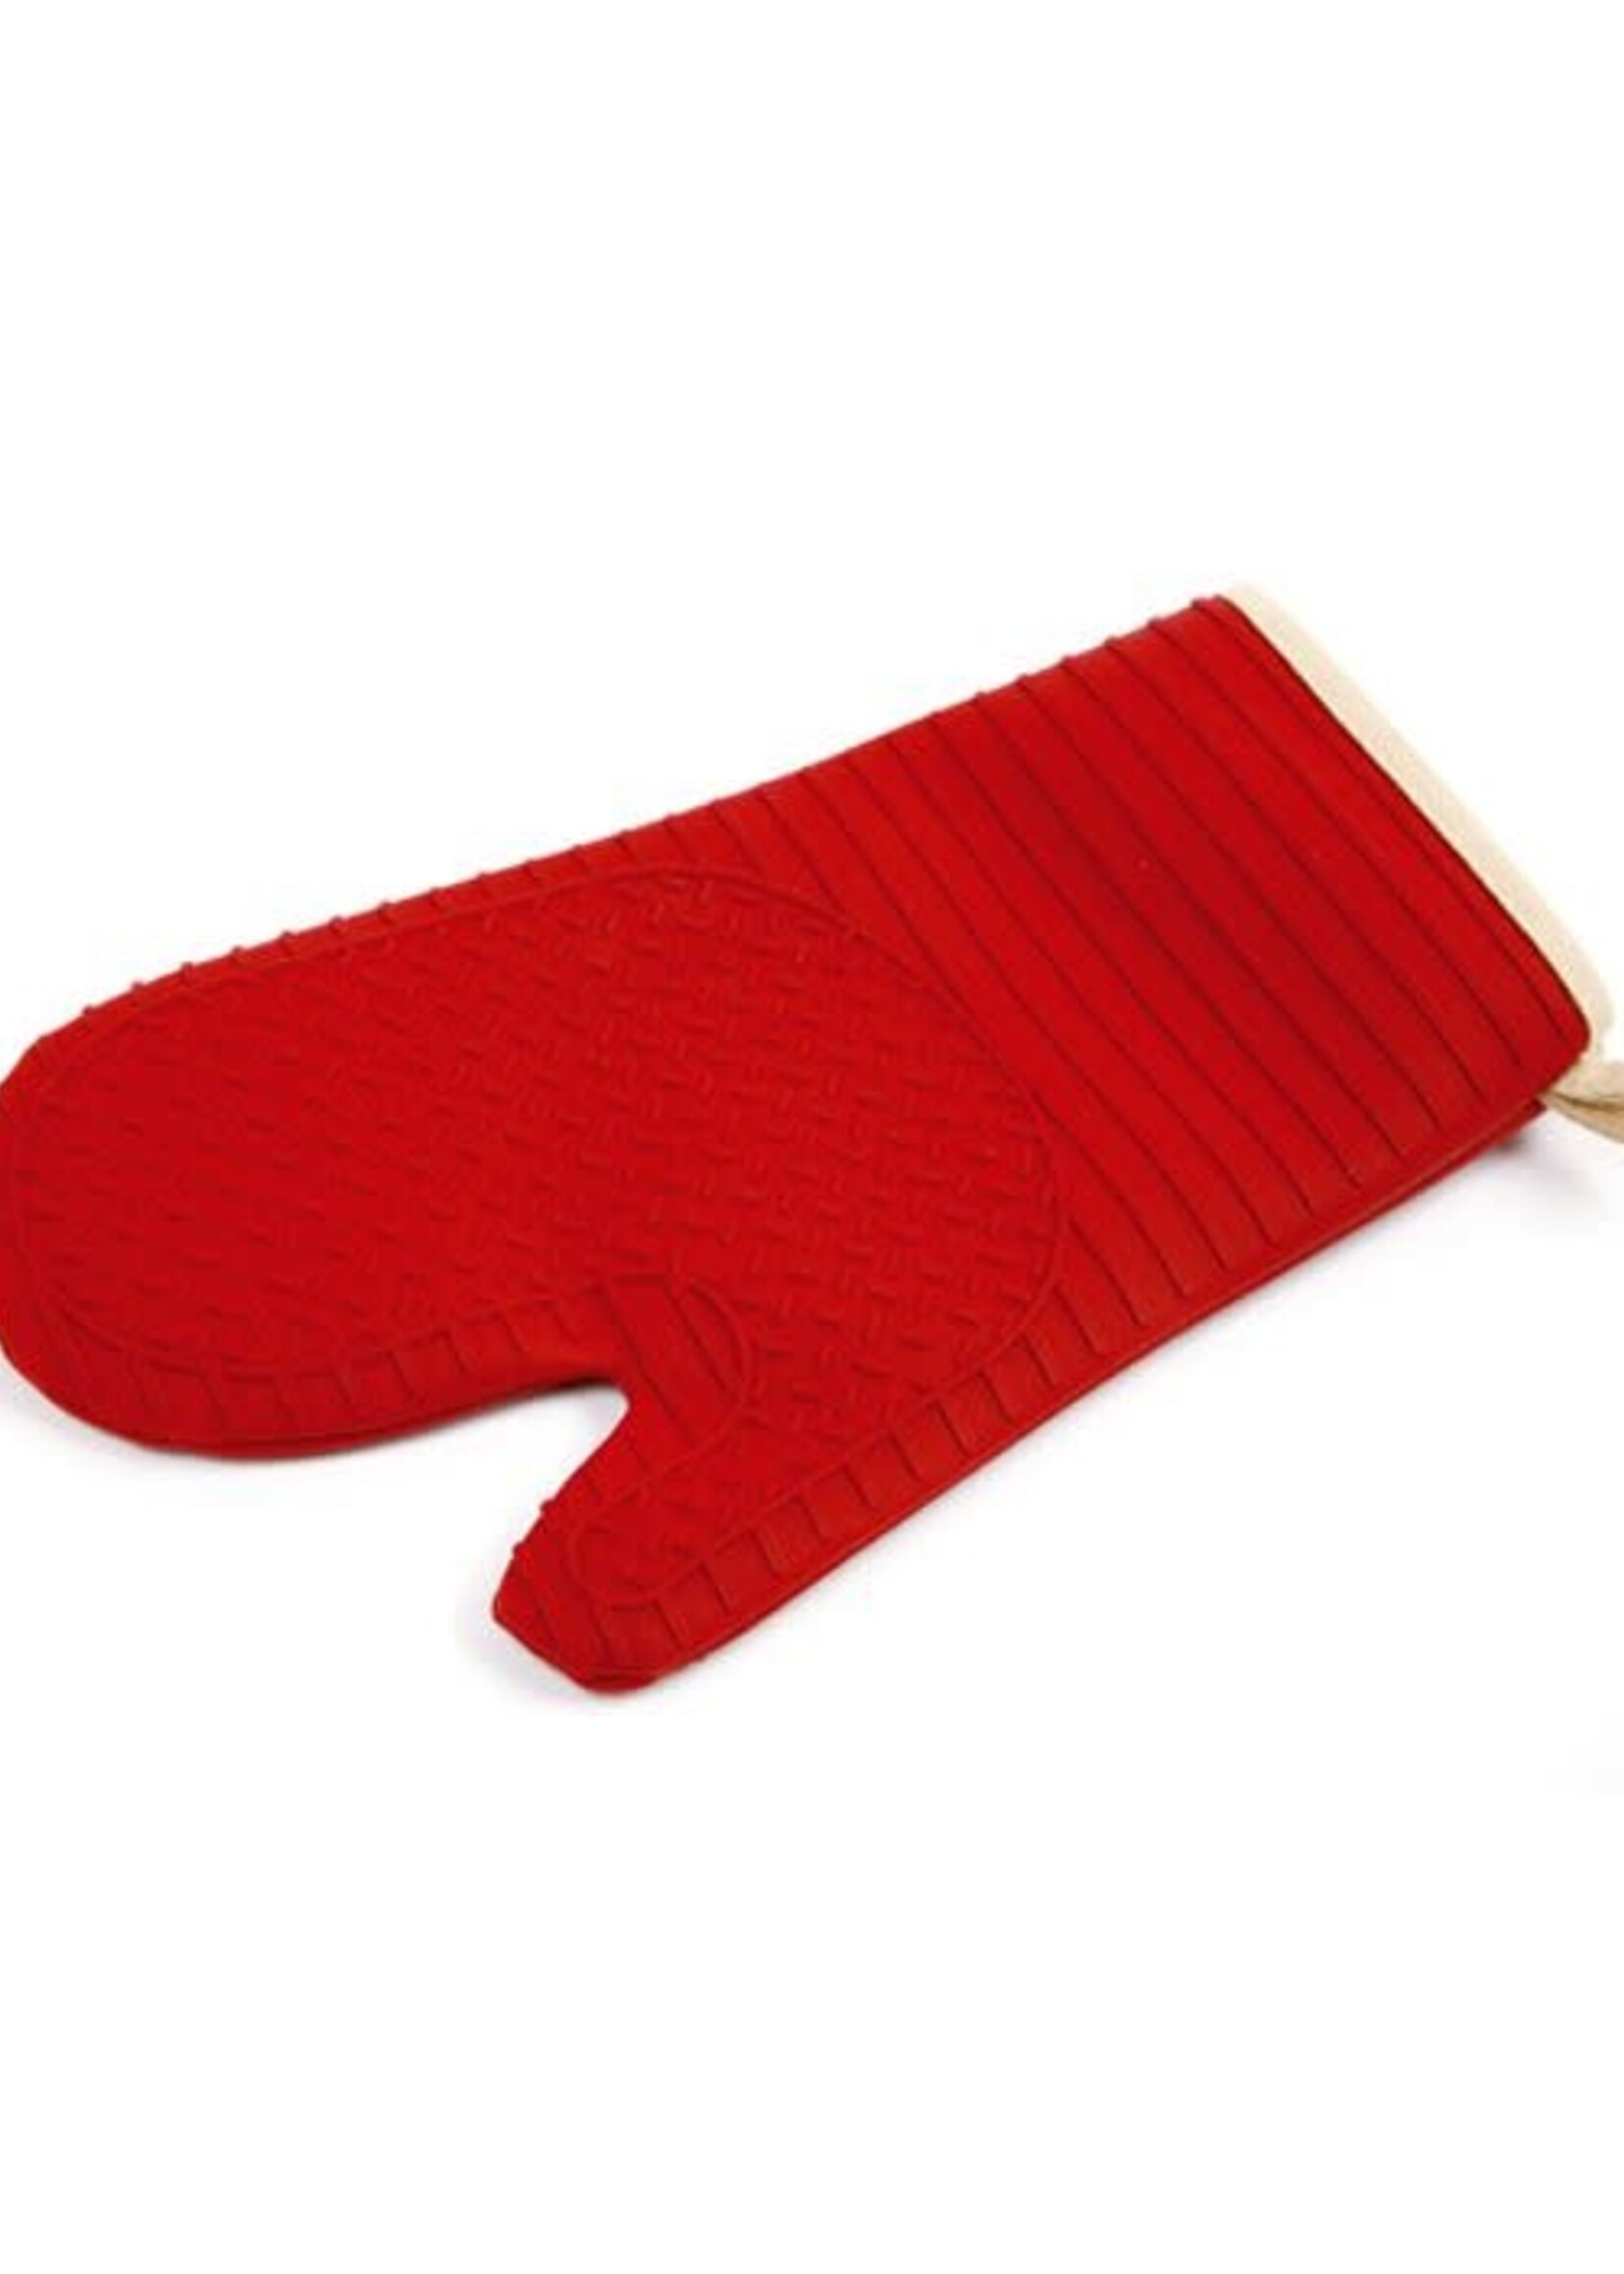 Norpro Silicone/Fabric Glove Red Large